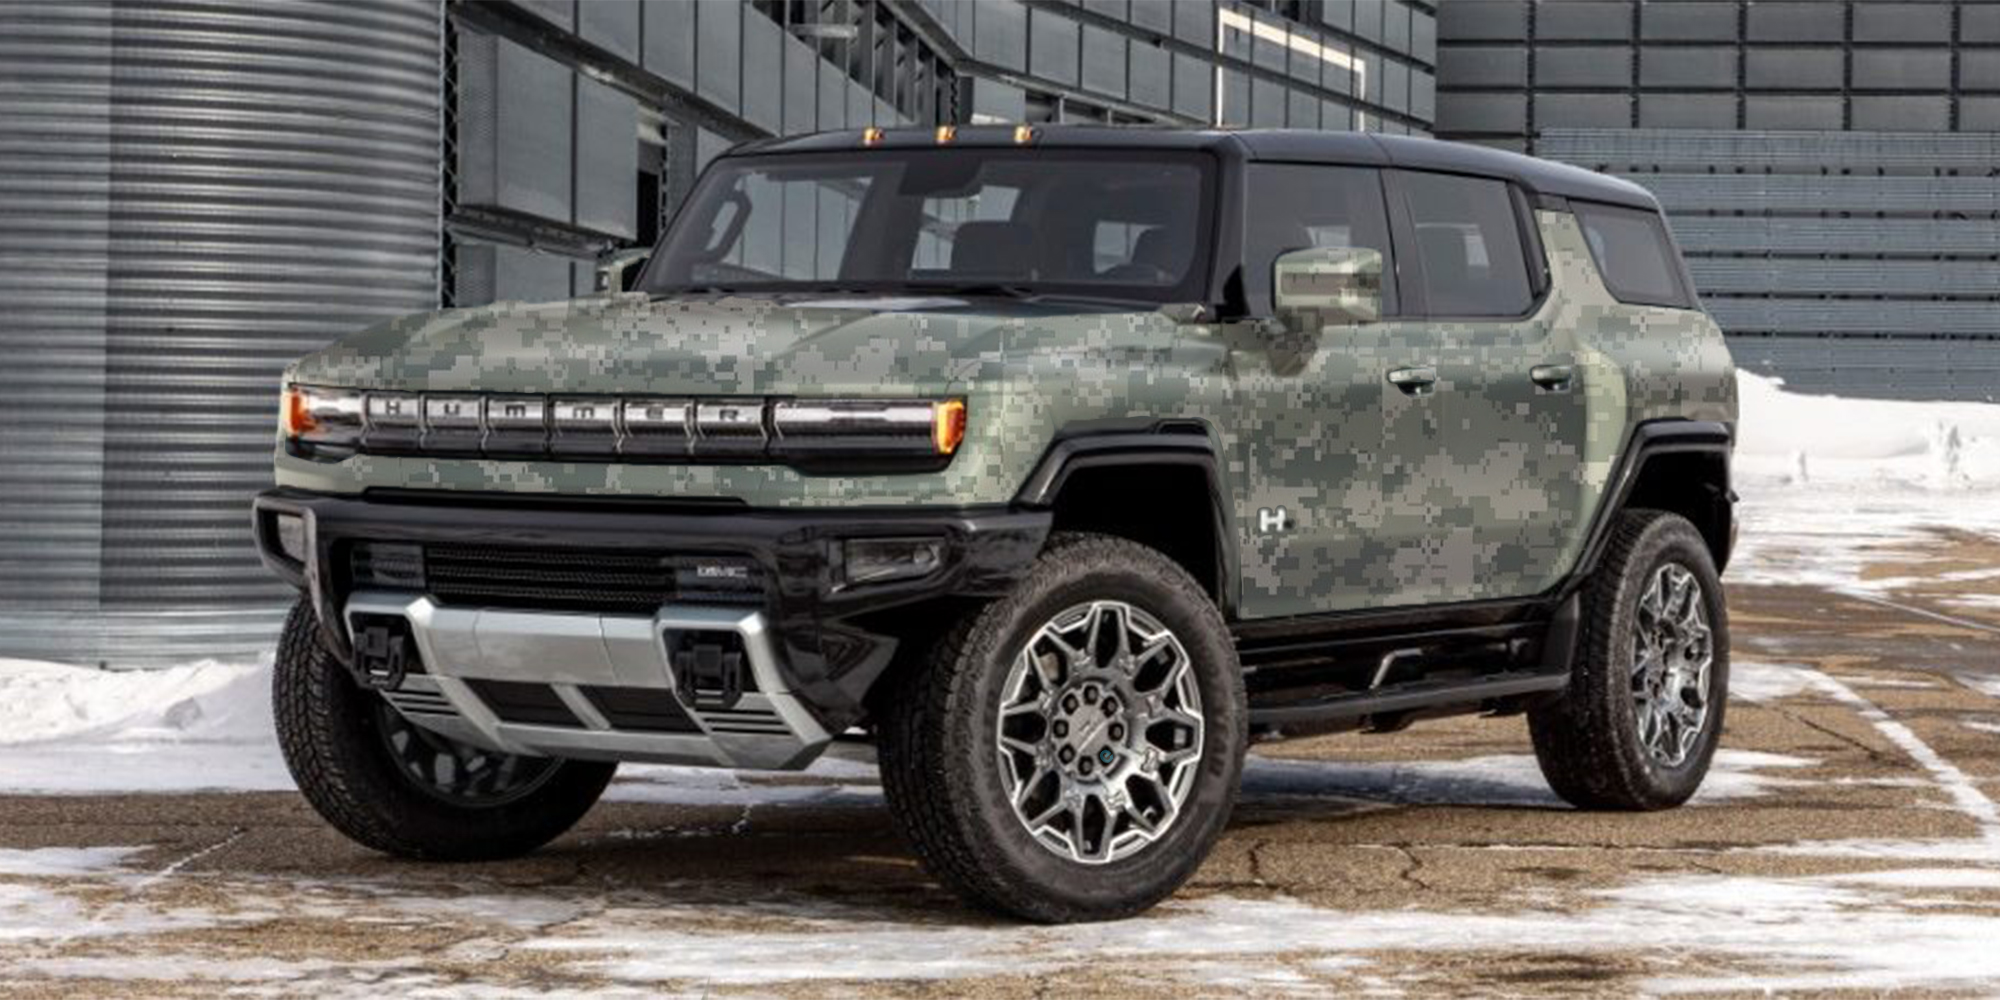 GM Defense is planning a military prototype based off the GMC Hummer EV -  Electrek